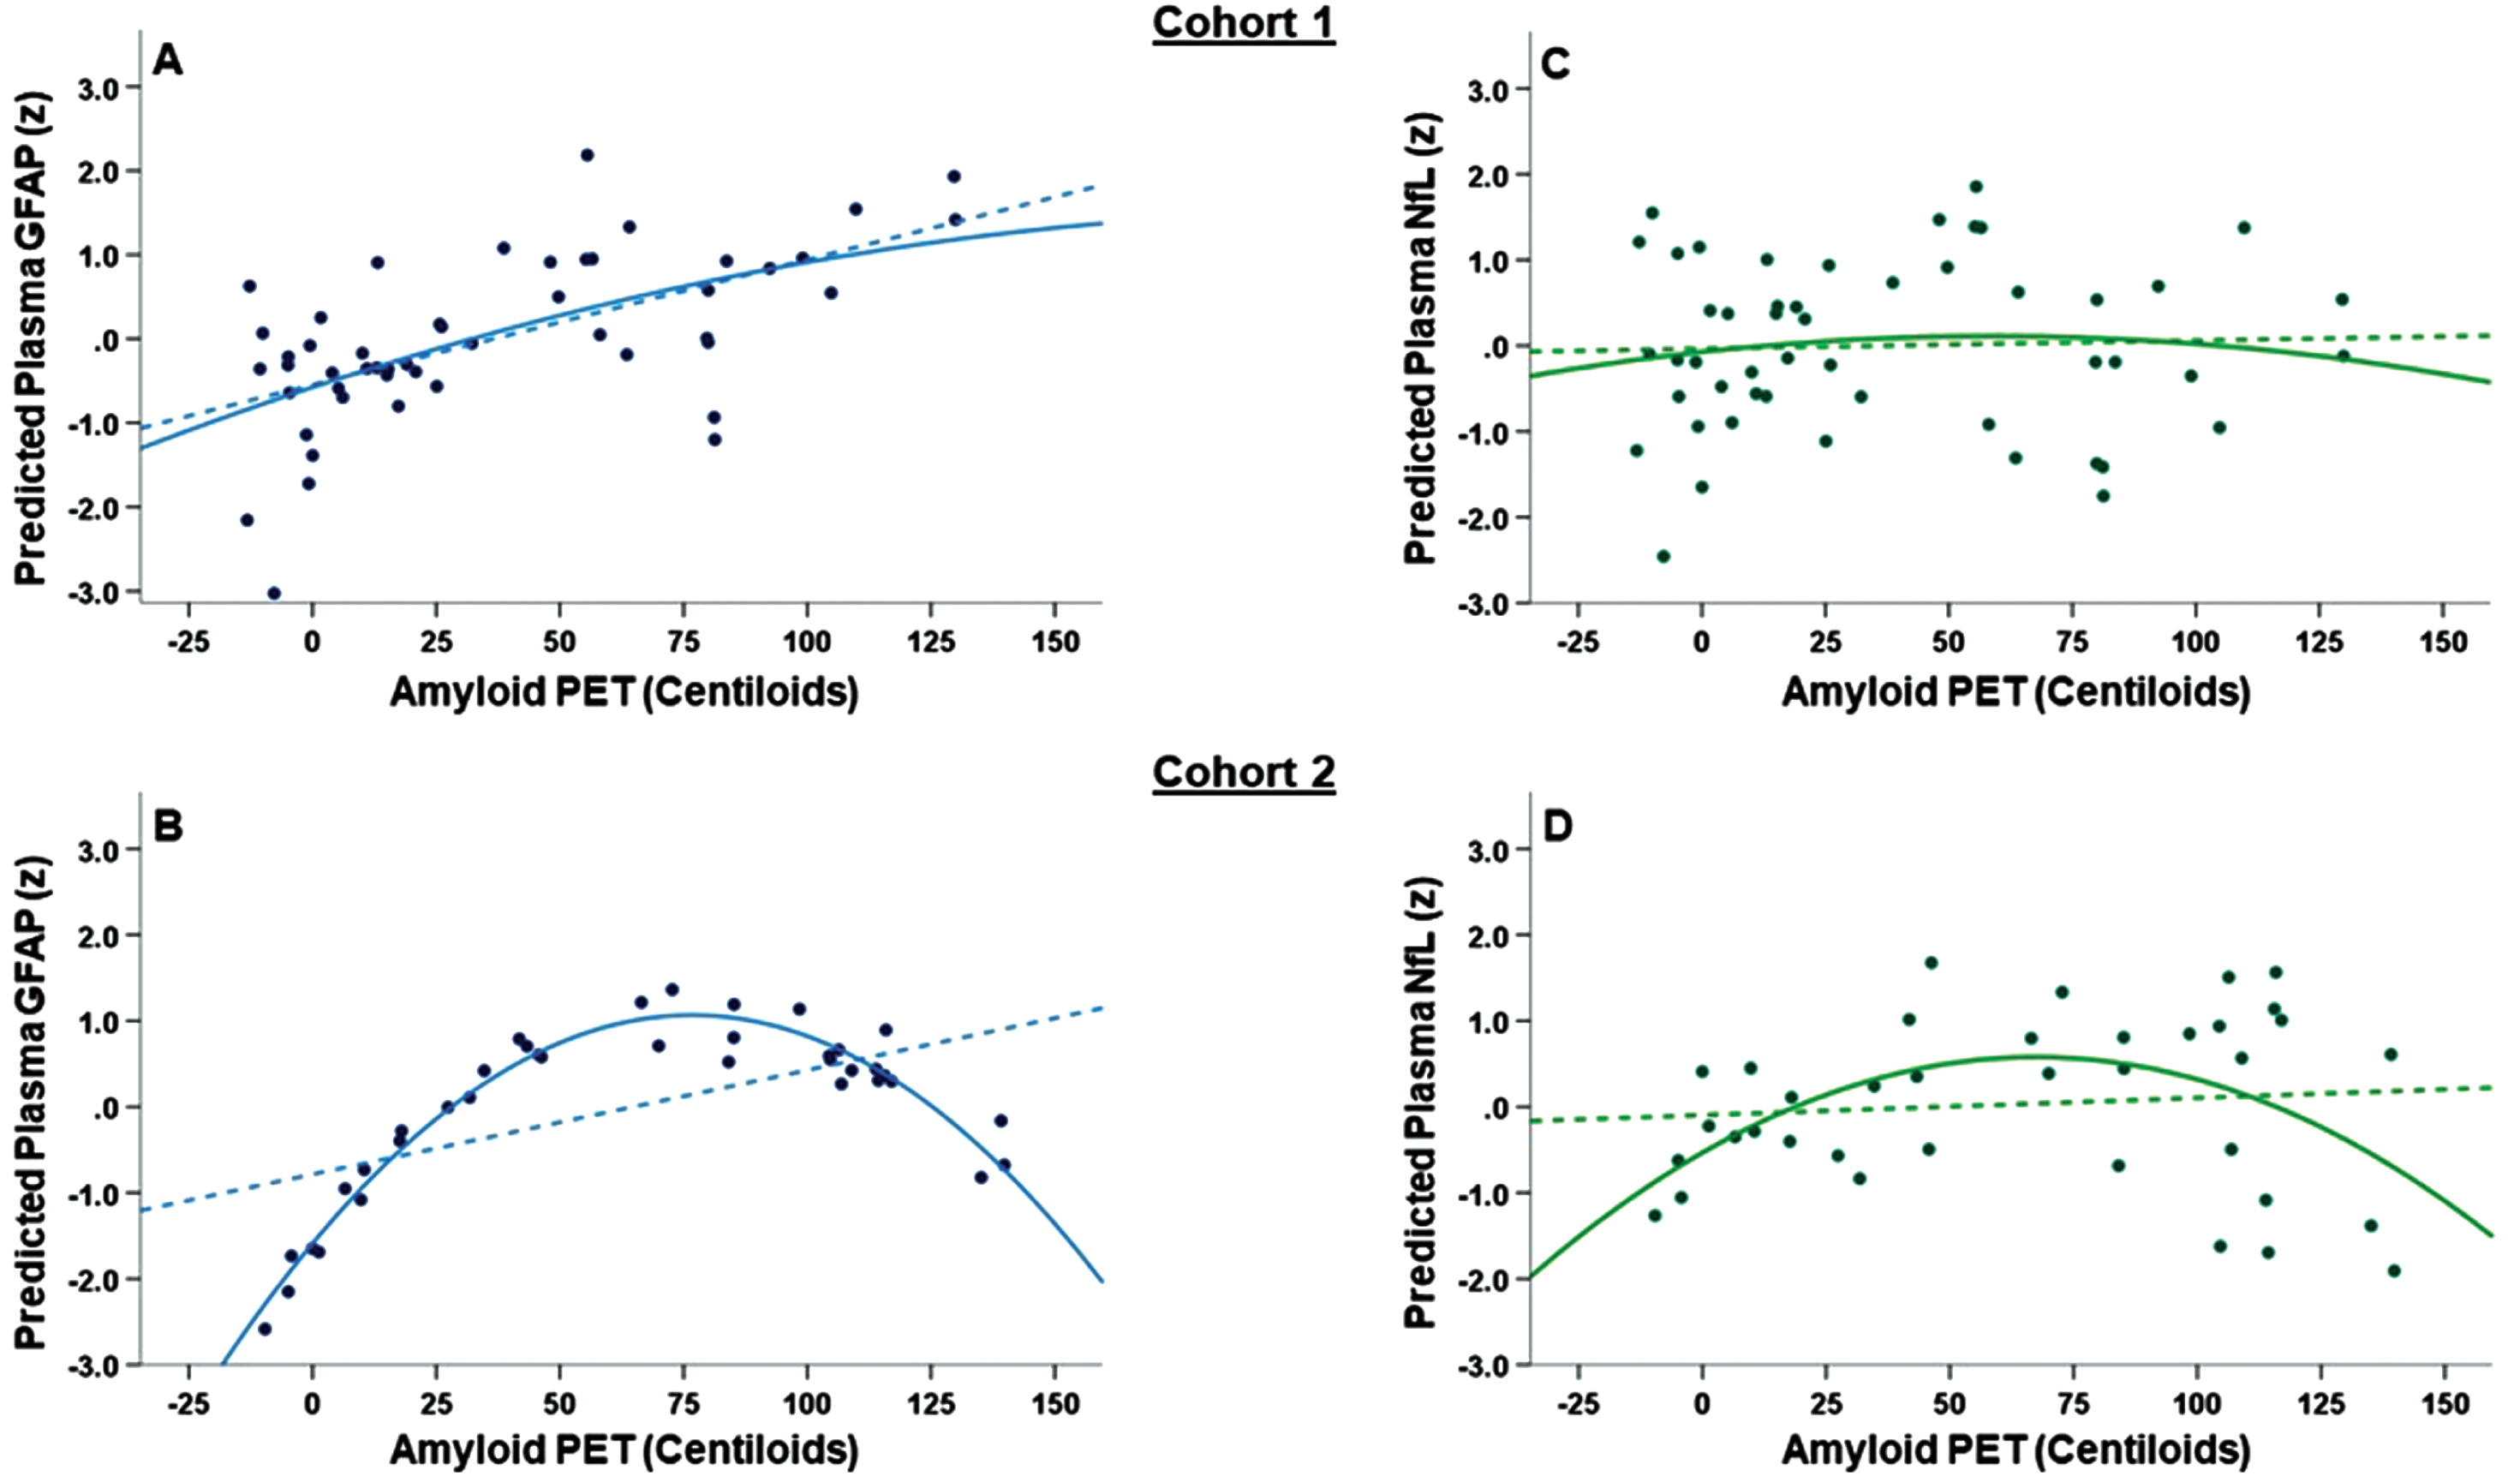 (A-D): Main effect of A β -PET CLs on plasma GFAP (A-B) and plasma NfL (C-D) concentrations. All figures show standardized model-predicted plasma biomarker concentrations on the Y-axis and both linear (dashed lines) and quadratic (solid lines) associations with amyloid PET (measured in Centiloids; CLs). For plasma GFAP, Cohort 1 (A) showed a linear association between higher Aβ-PET CLs and higher plasma GFAP while Cohort 2 (B) showed a curvilinear association. Cohort 2 notably differed from Cohort 1 in the range of clinical disease stage (see Figure 1). There were no statistically significant associations between Aβ-PET CLs and plasma NfL in either Cohort 1 (C) or Cohort 2 (D).